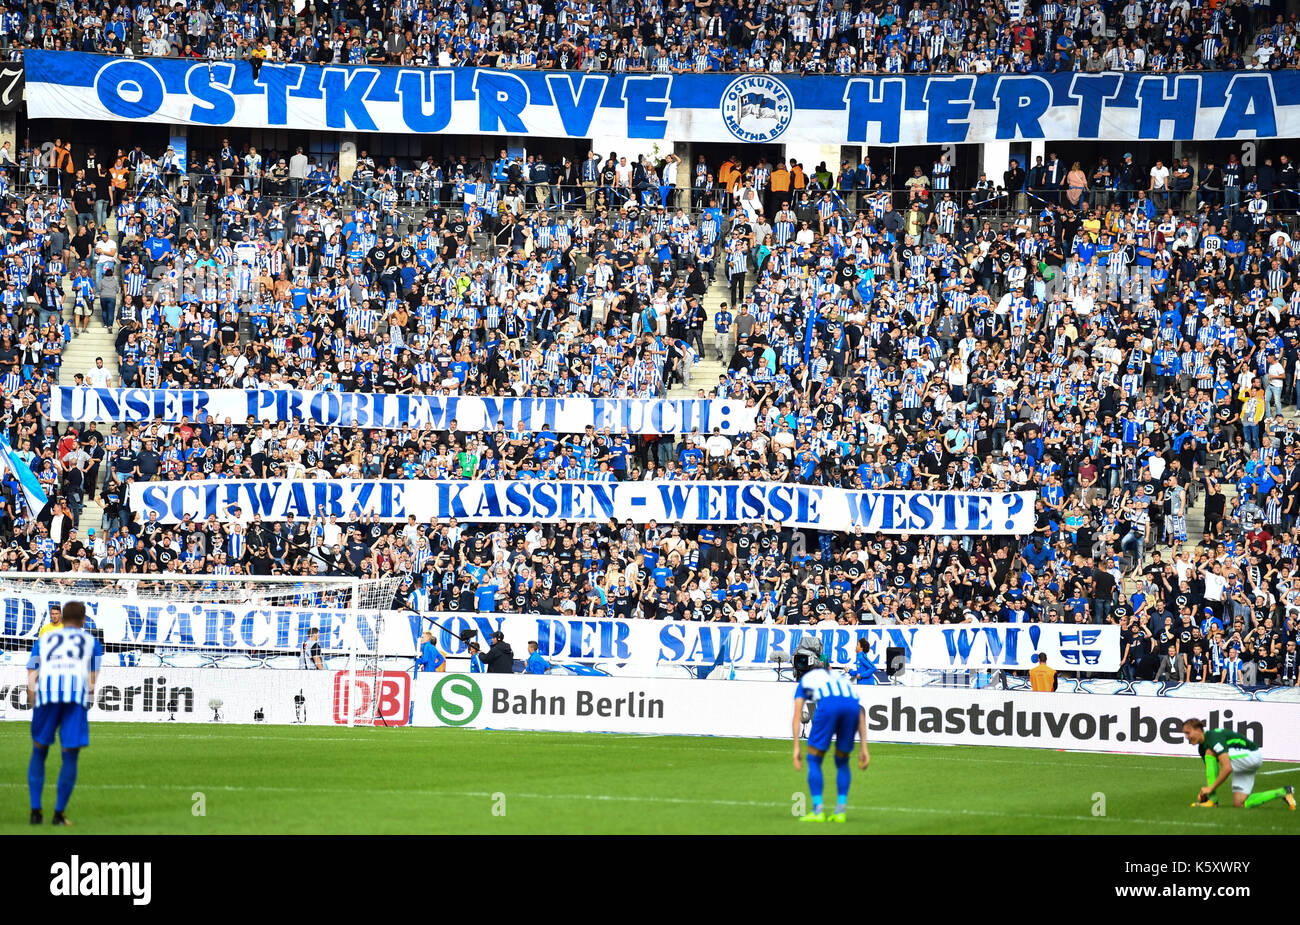 Berlin, Germany. 10th Sep, 2017. Fans of Hertha hold up banners reading: 'Unser Problem mit Euch: Schwarze Kassen, Weiße Weste. Das Märchen von der sauberen WM' (lit. 'Our problem with you: Black checkout, white vests. The fairytale of the clean World Cup') during the German Bundesliga soccer match between Hertha BSC and Werder Bremen at the Olympia stadium in Berlin, Germany, 10 September 2017. Photo: Soeren Stache/dpa/Alamy Live News Stock Photo